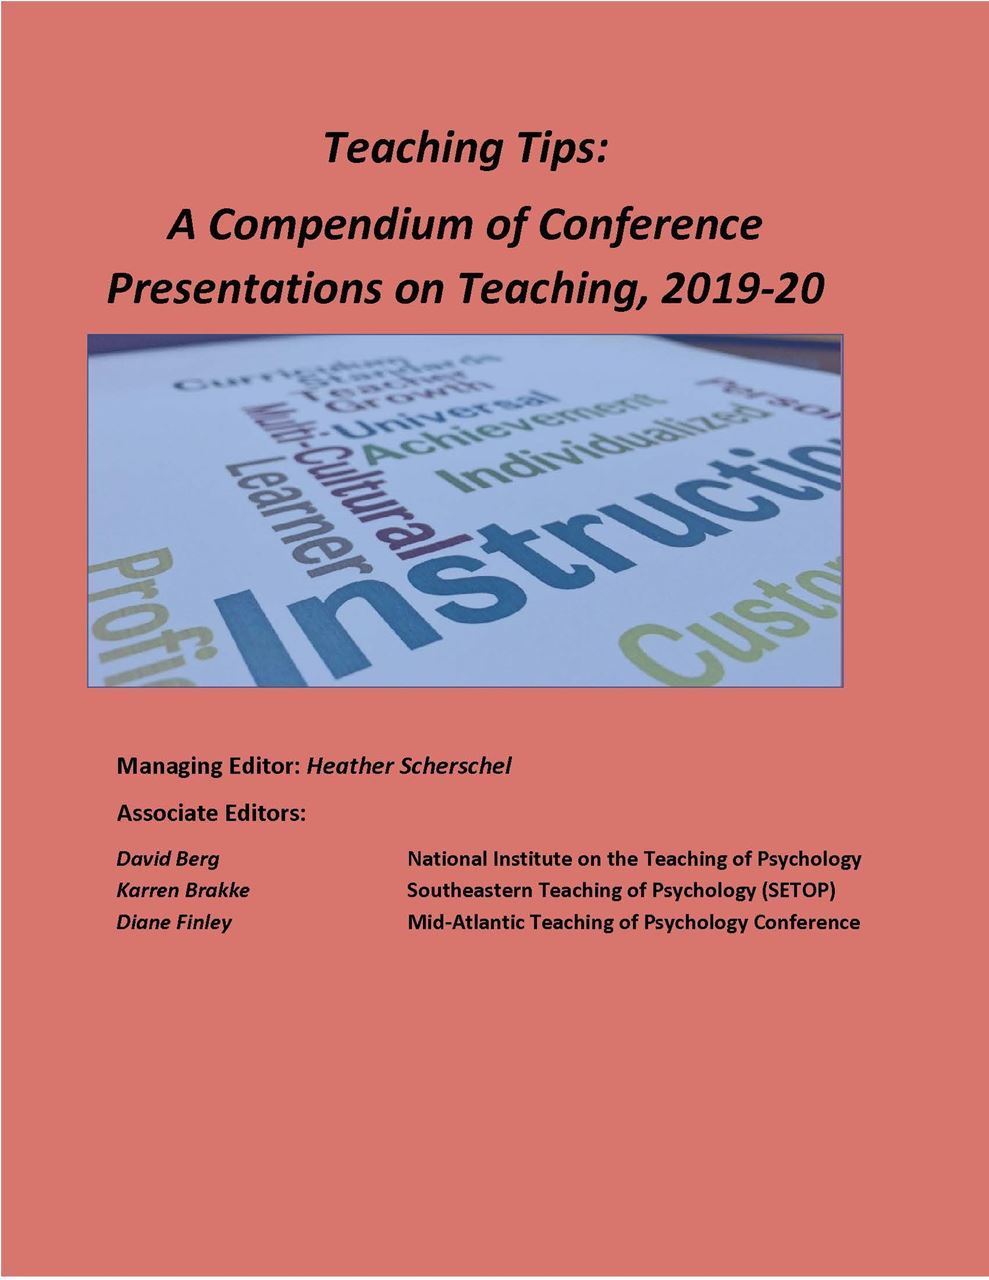 Teaching Tips: A Compendium of Conference Presentations on Teaching, 2019-2020 